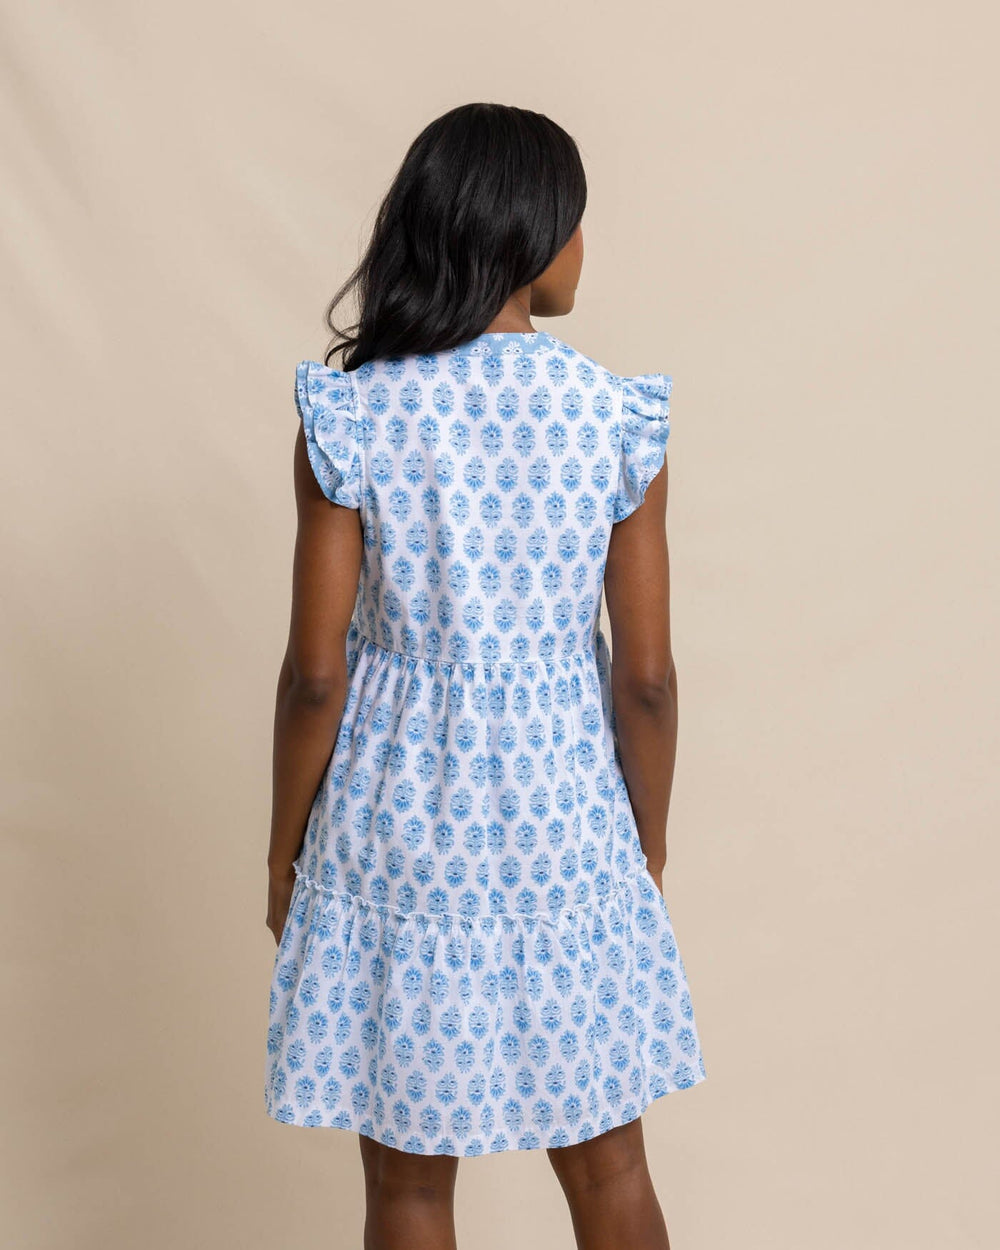 The back view of the Southern Tide Eloise Garden Variety Printed Dress by Southern Tide - Classic White